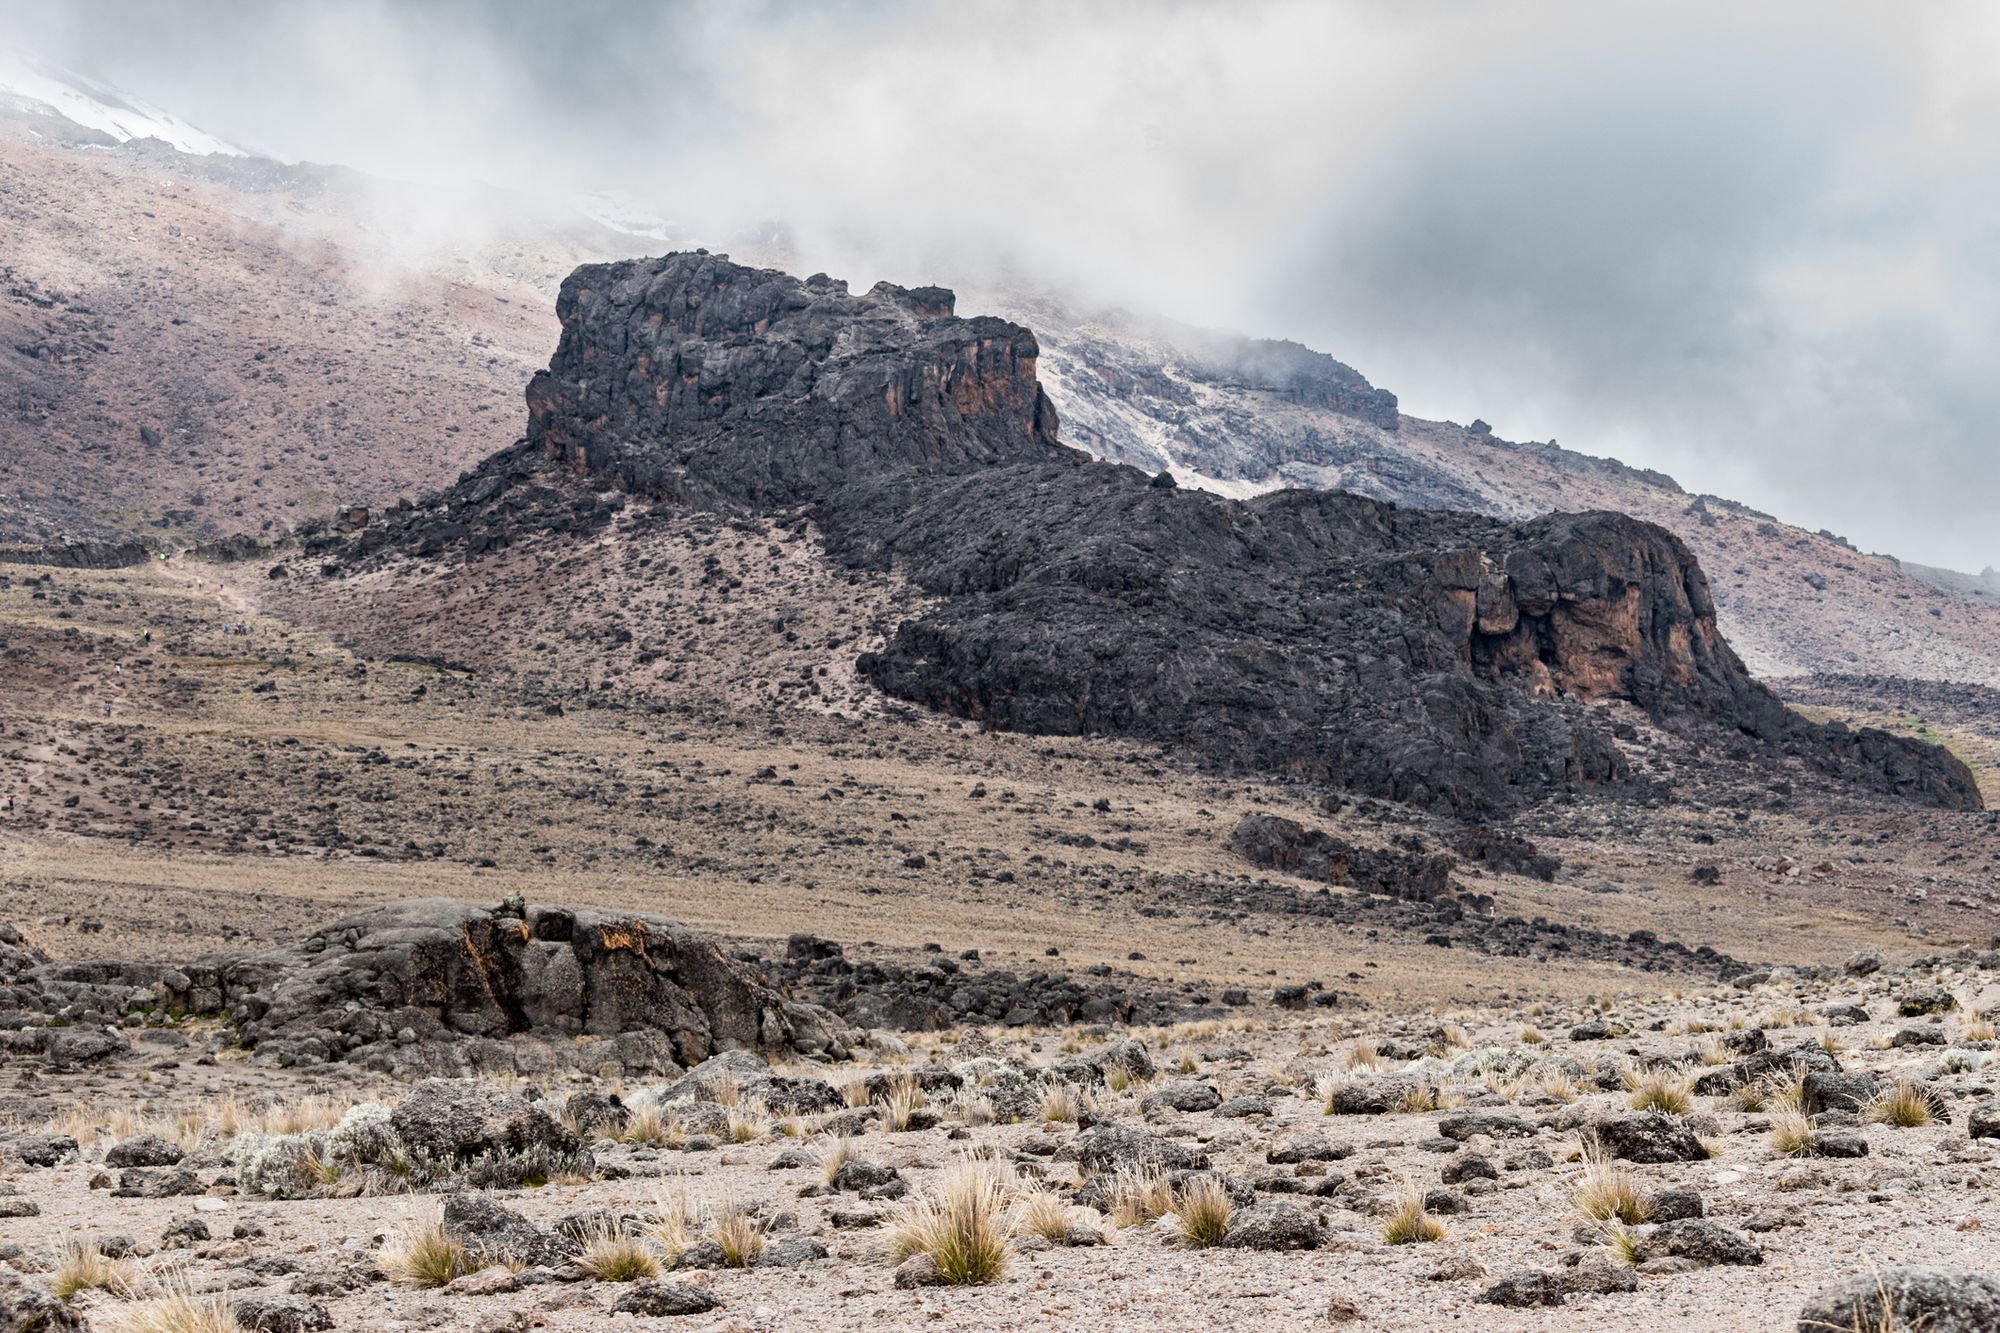 An otherworldly lava tower, on the slopes of Kilimanjaro